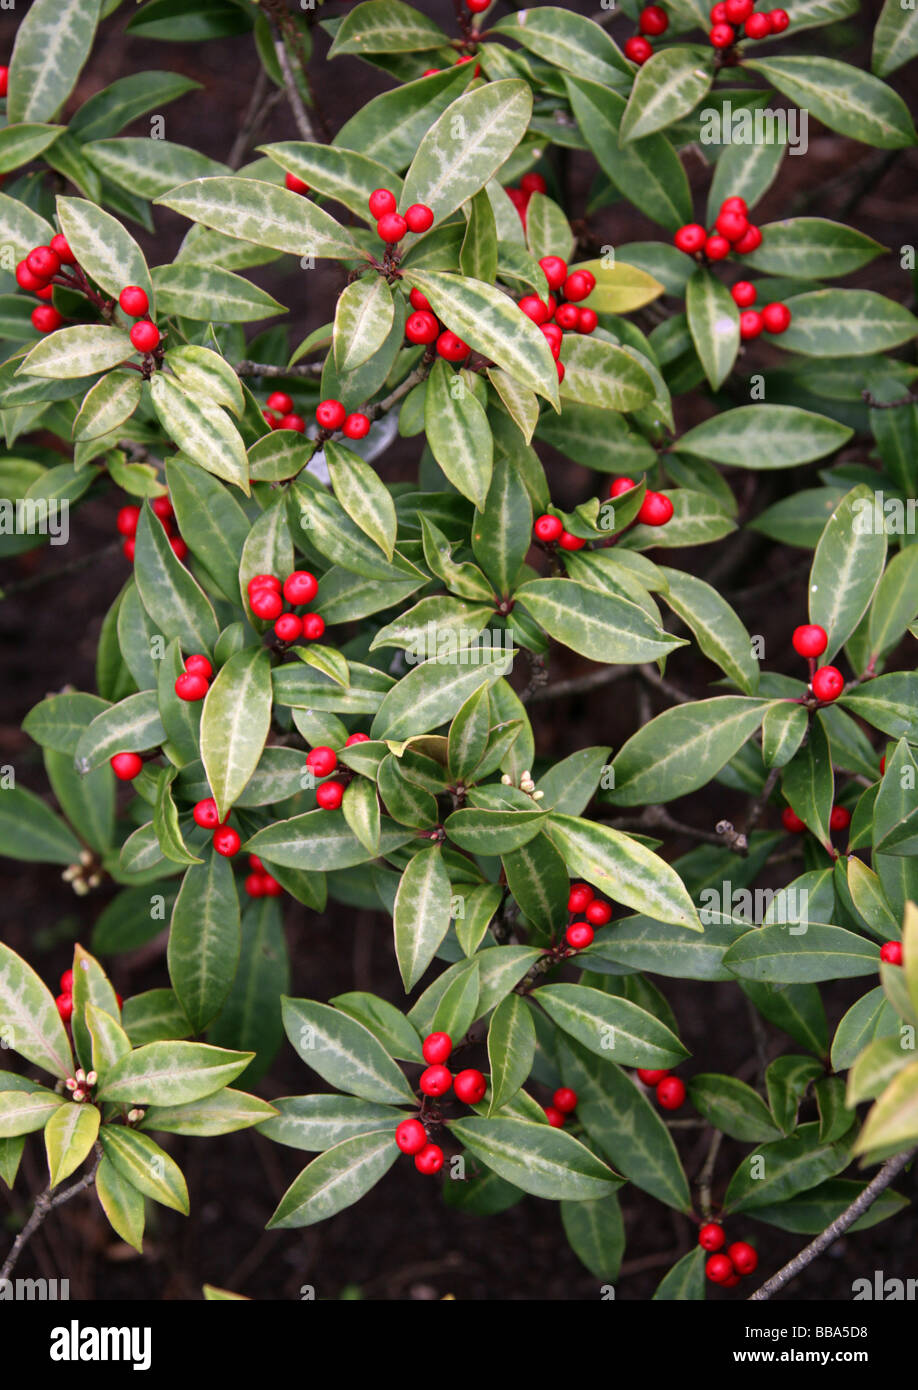 Skimmia japonica subsp. reevesiana, Rutaceae, Japan, China and East Asia. Stock Photo